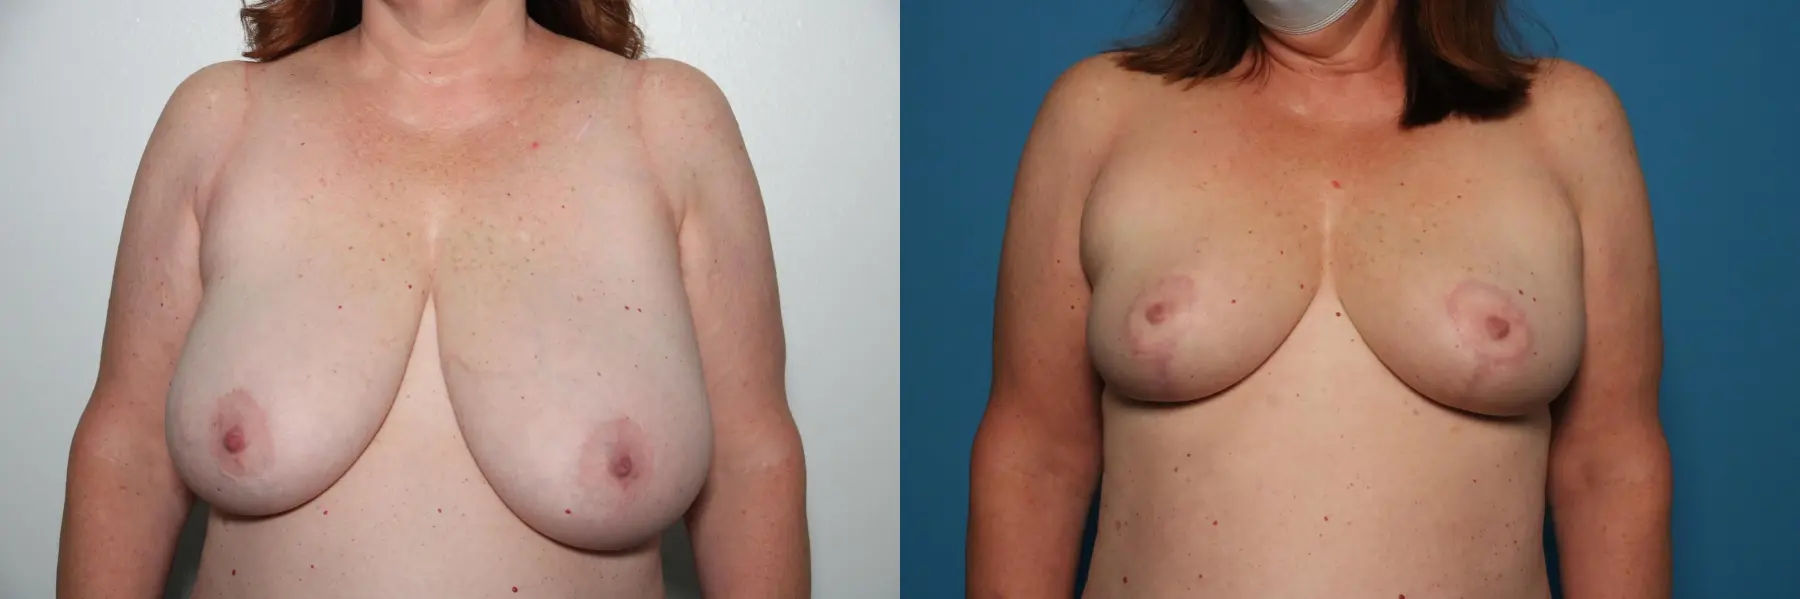 Breast Lift-Reduction: Patient 20 - Before and After  